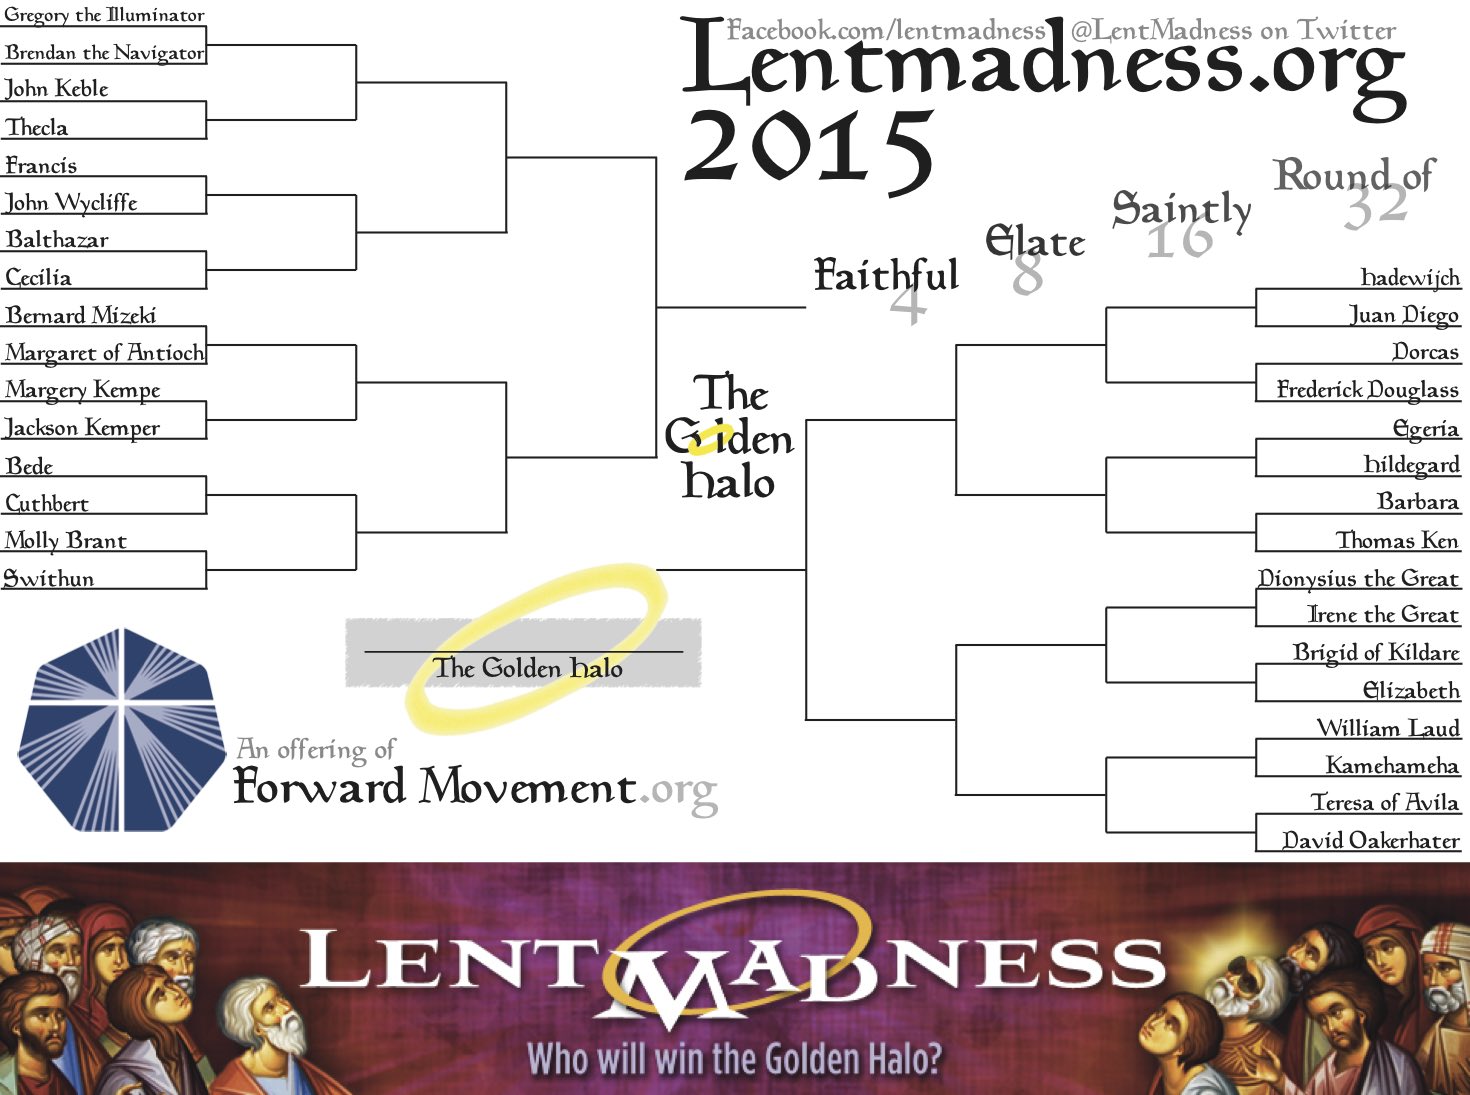 All Brackets Day: The 2015 Bracket Unveiled! | Lent Madness